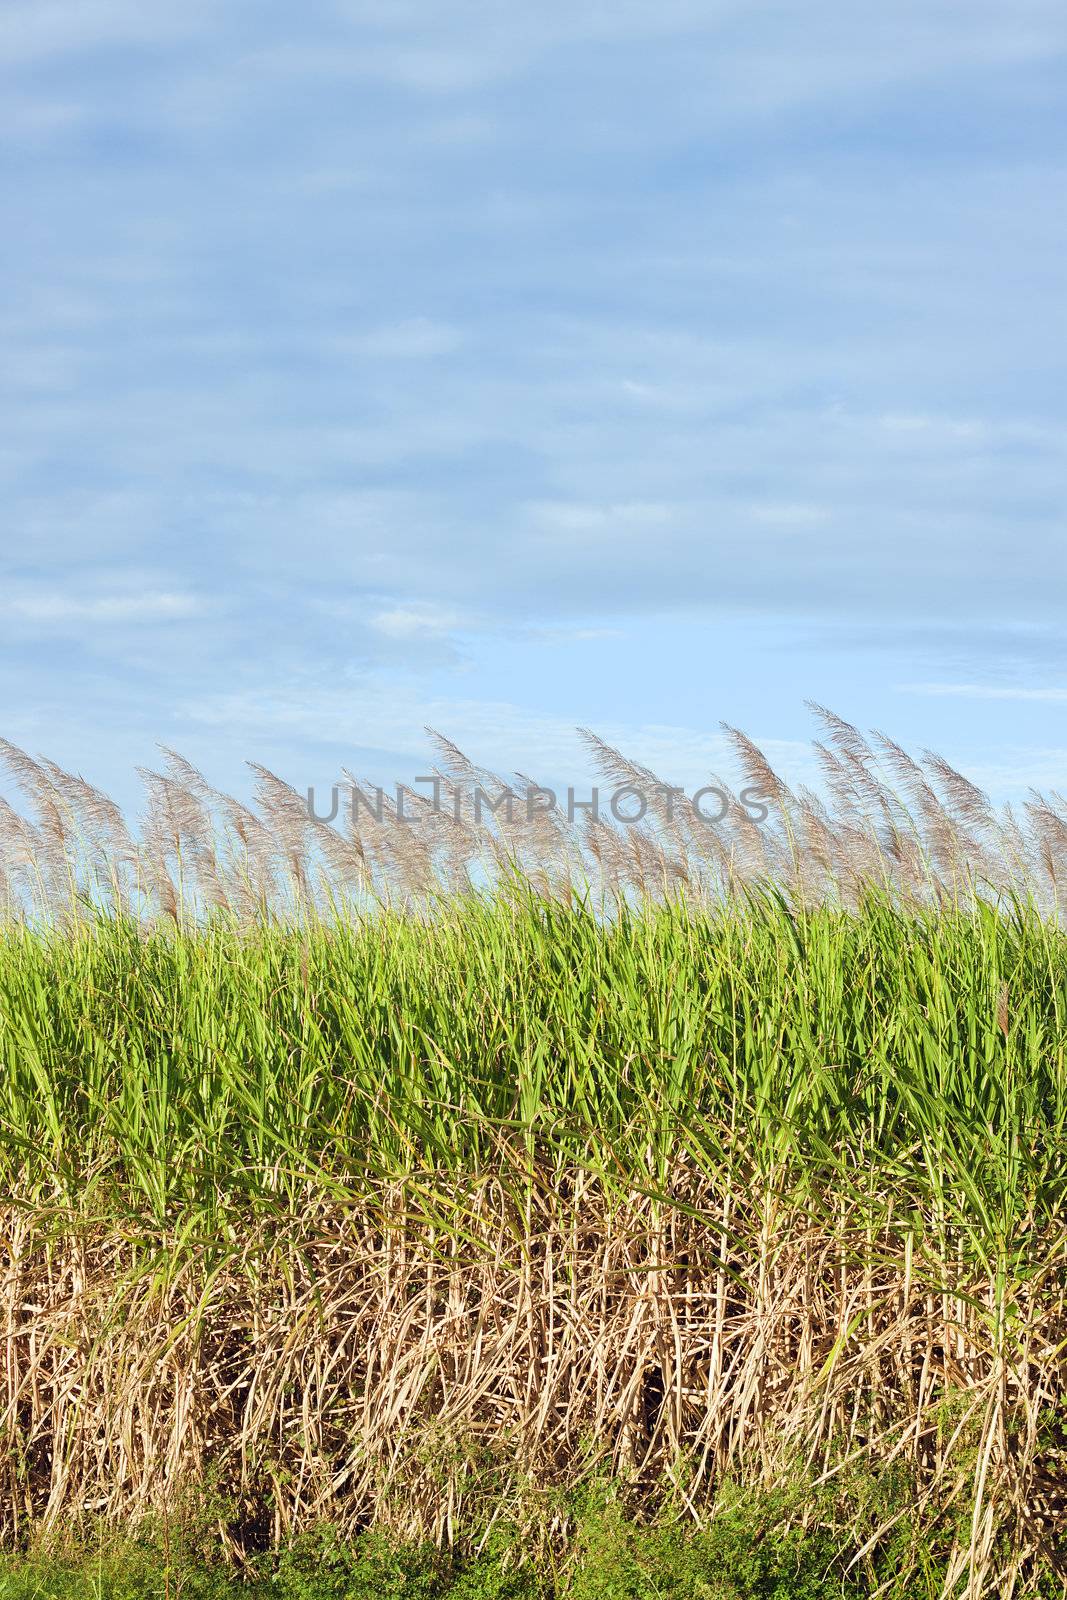 A lovely shot of a sugar cane field in bloom